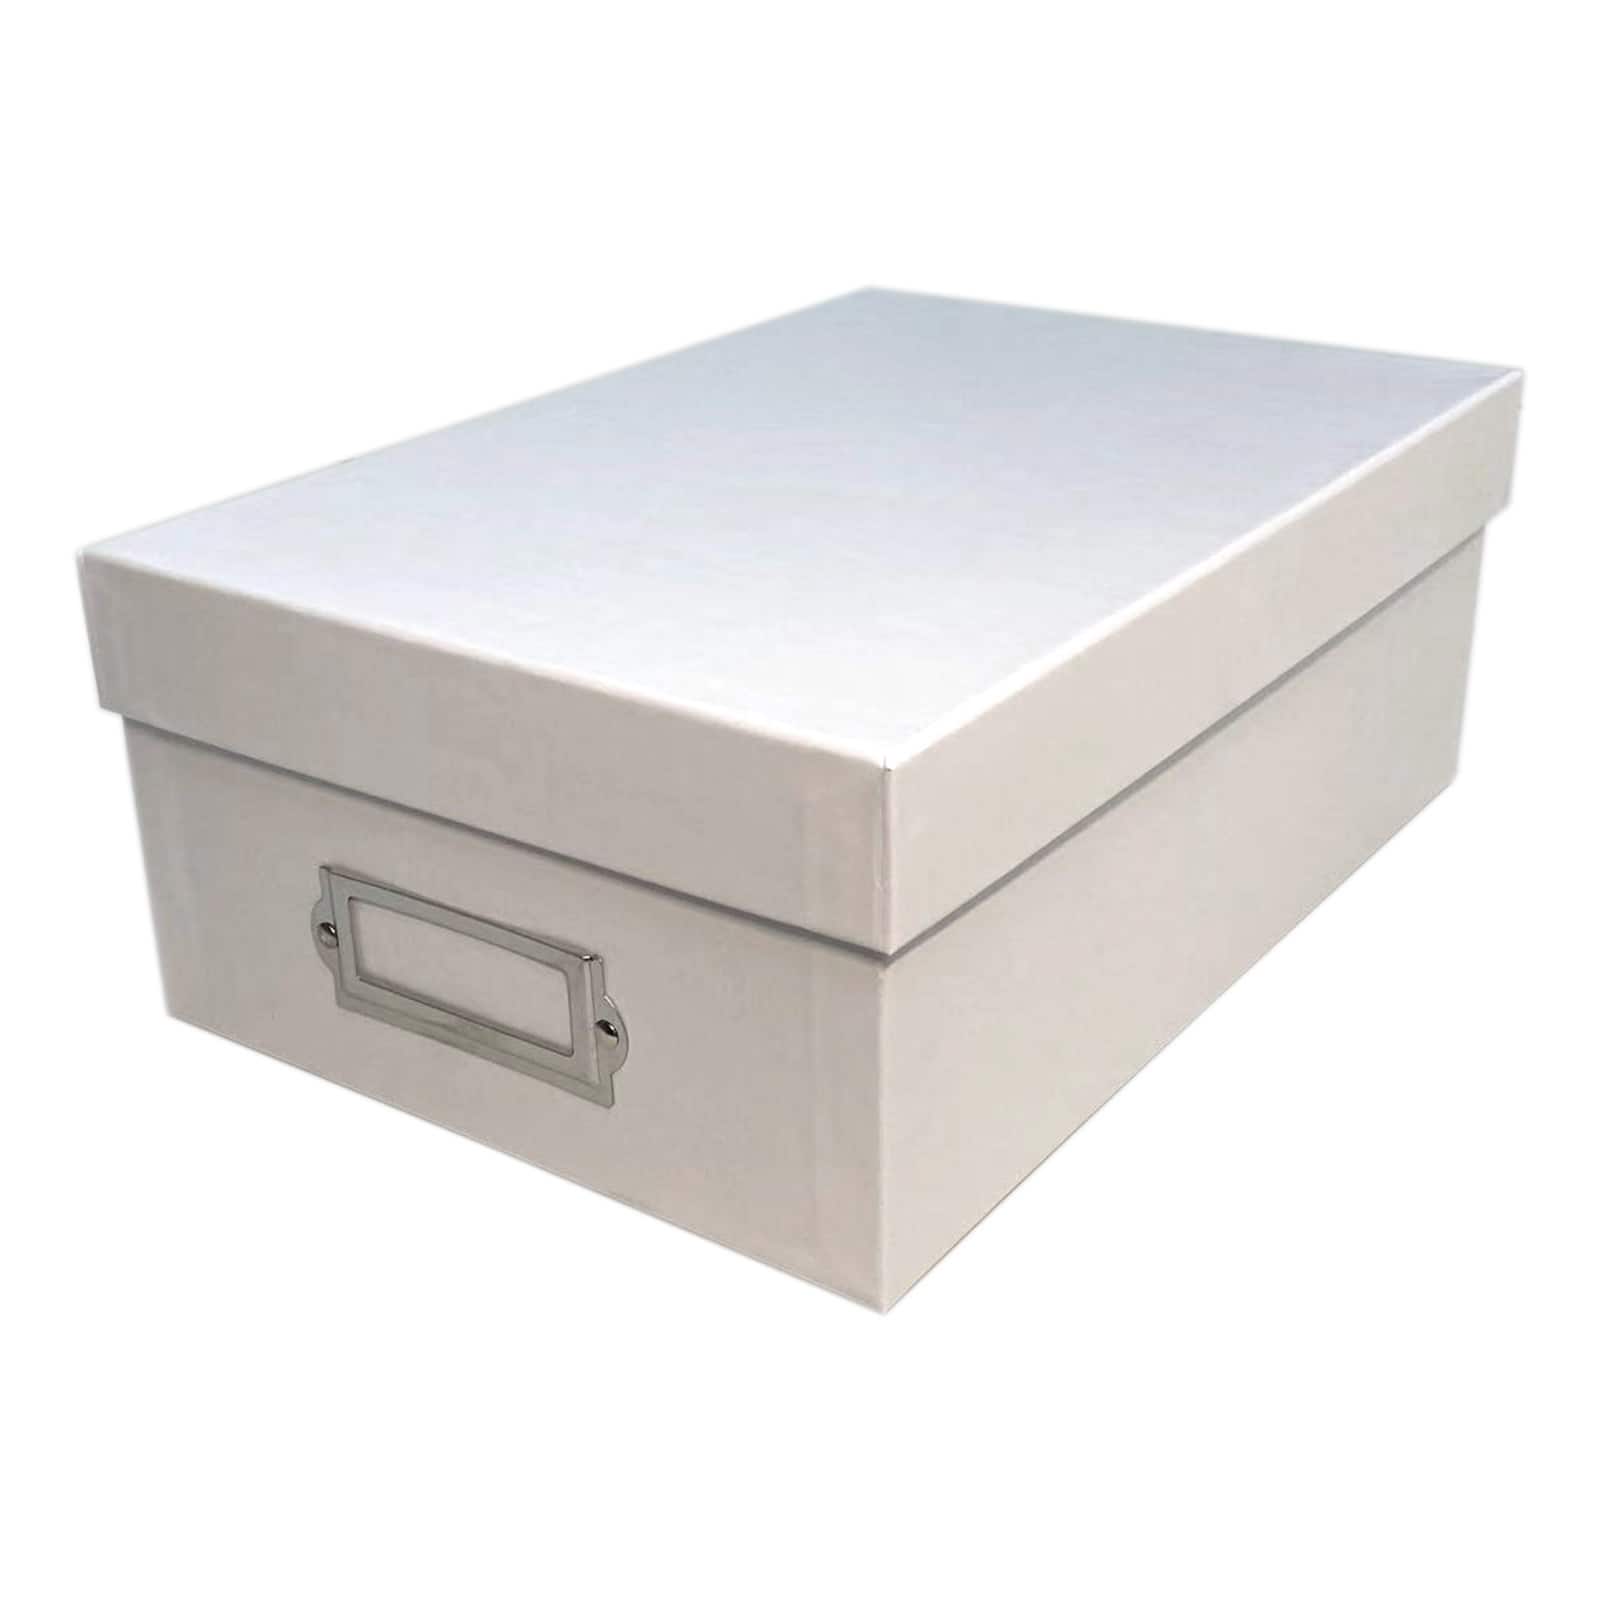 12 Pack: White Memory Box by Simply Tidy™ | Michaels